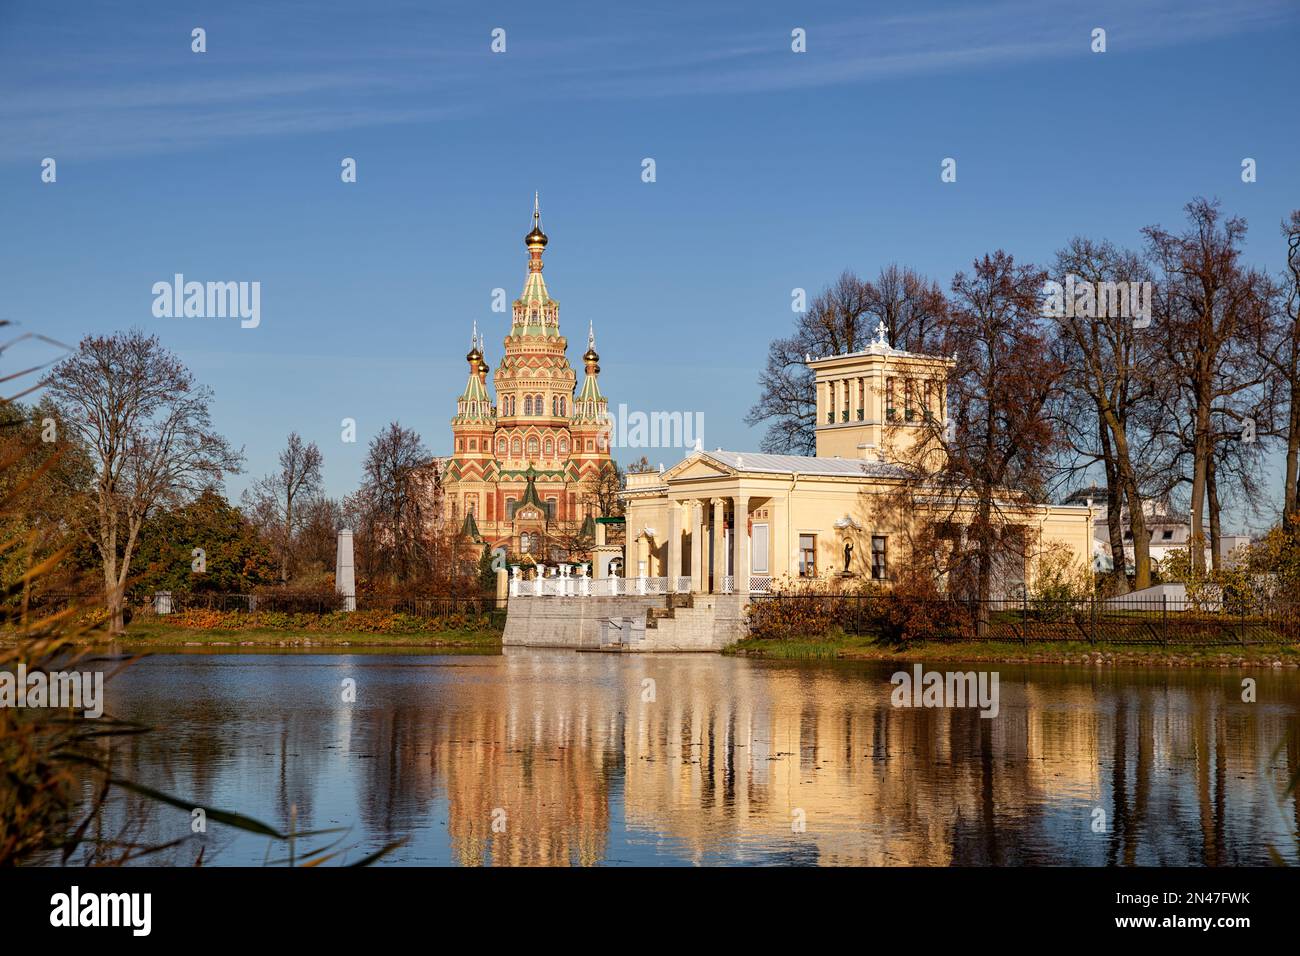 Olga's pond in Peterhof. View of the Tsaritsyn Pavilion and the Cathedral of the Holy Apostles Peter and Paul. Saint Petersburg, Russia Stock Photo